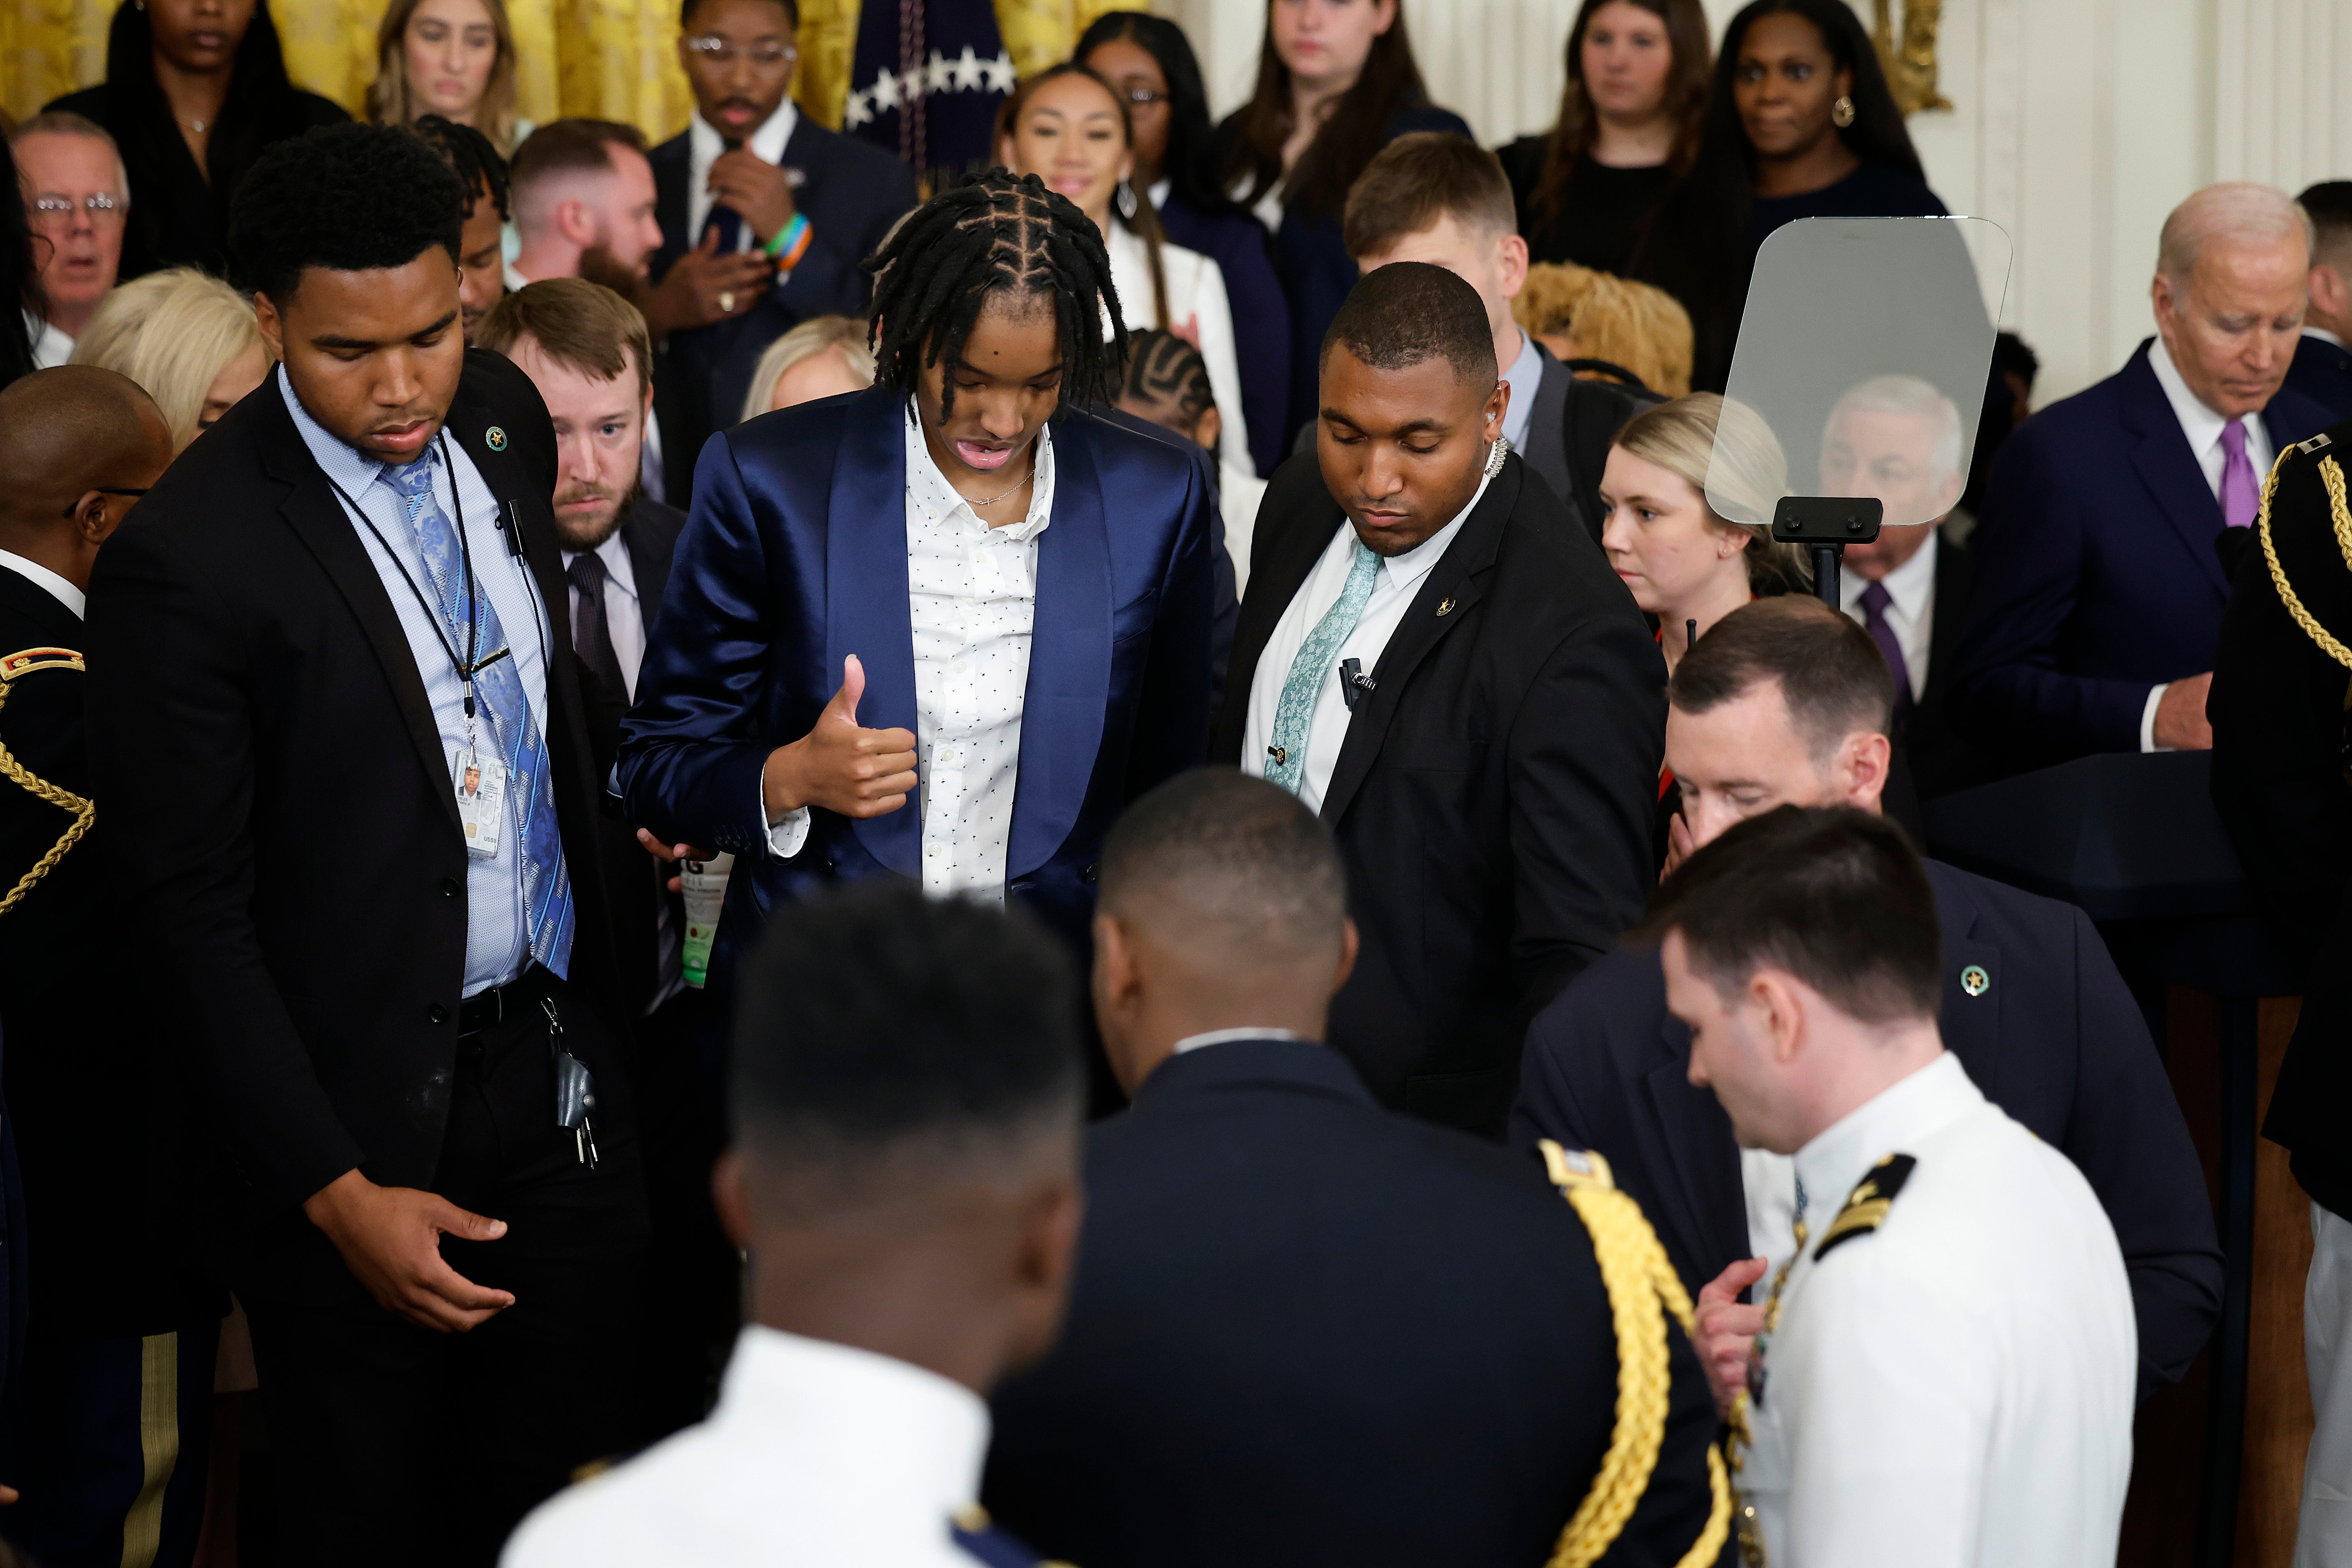 President Biden’s speech briefly paused after LSU women’s basketball star collapses during White House visit